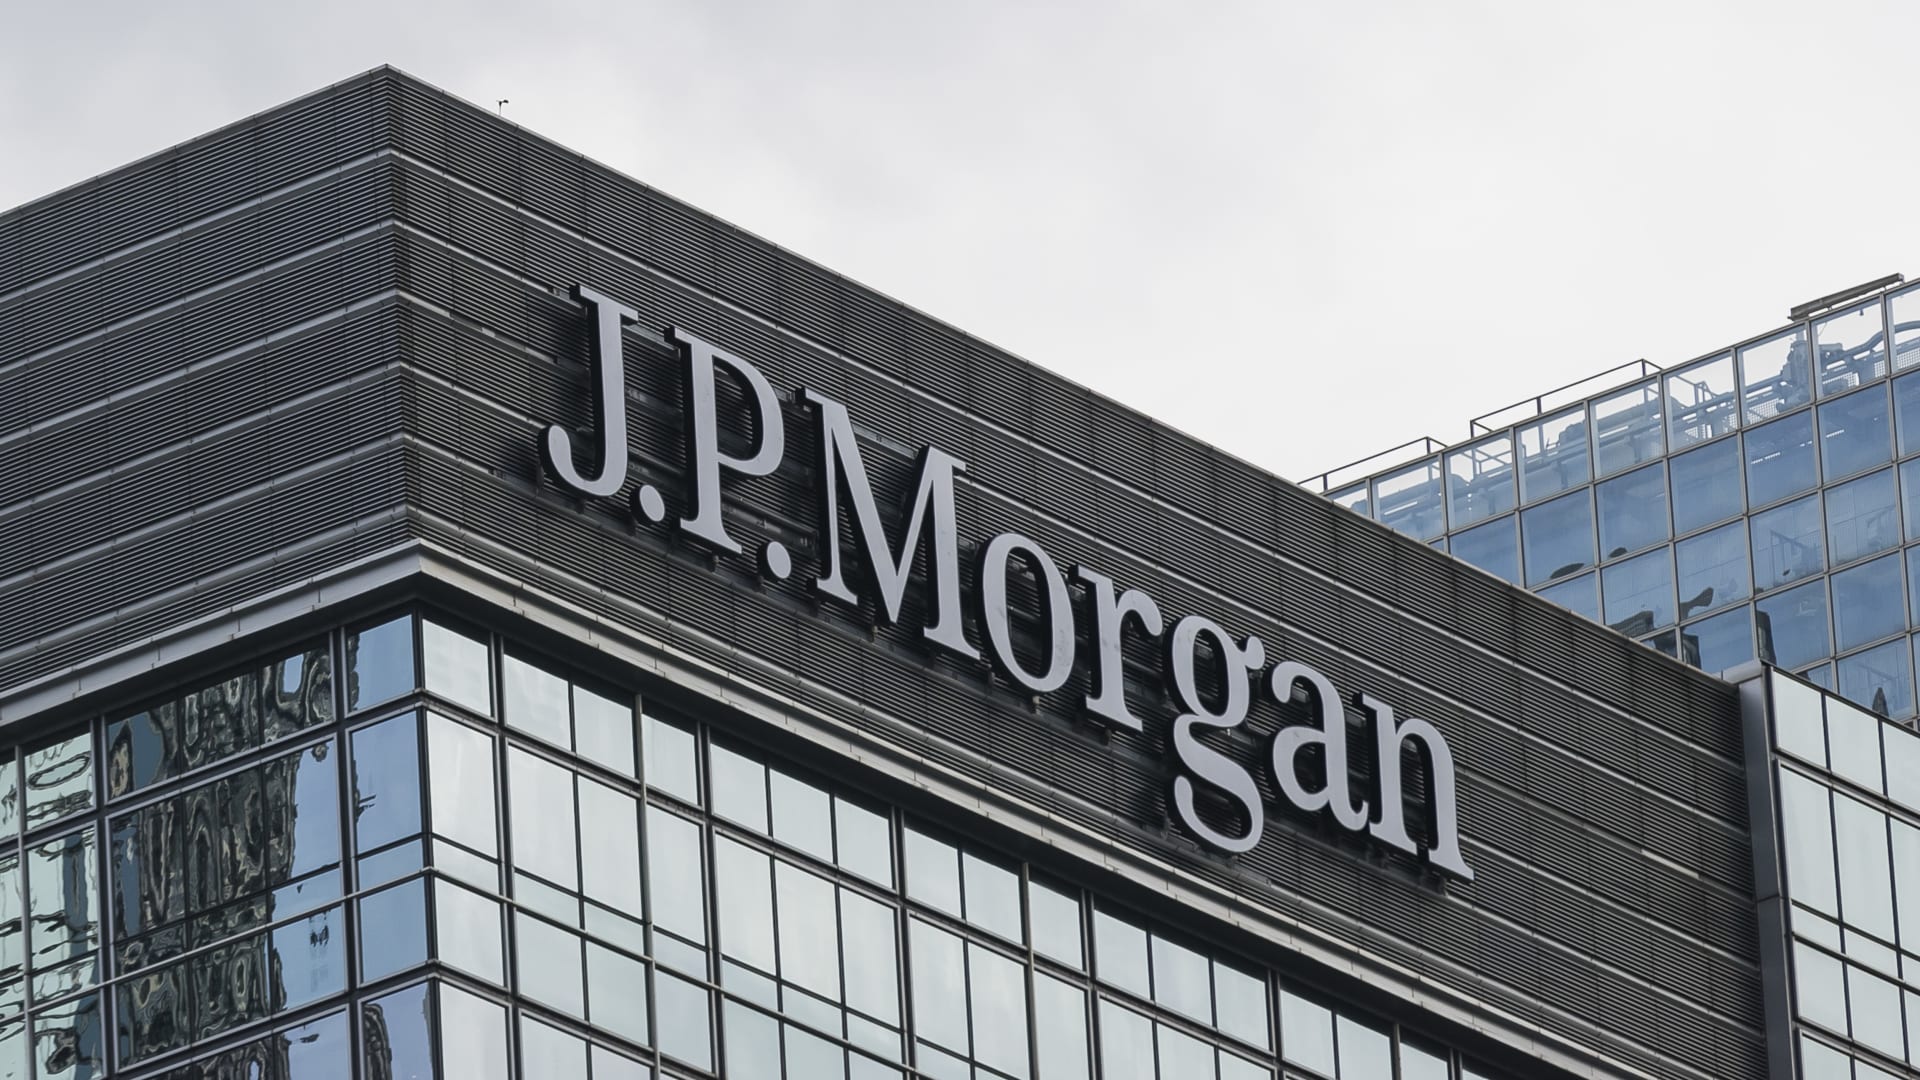 JPMorgan agrees to purchase 0 million worth of carbon removal